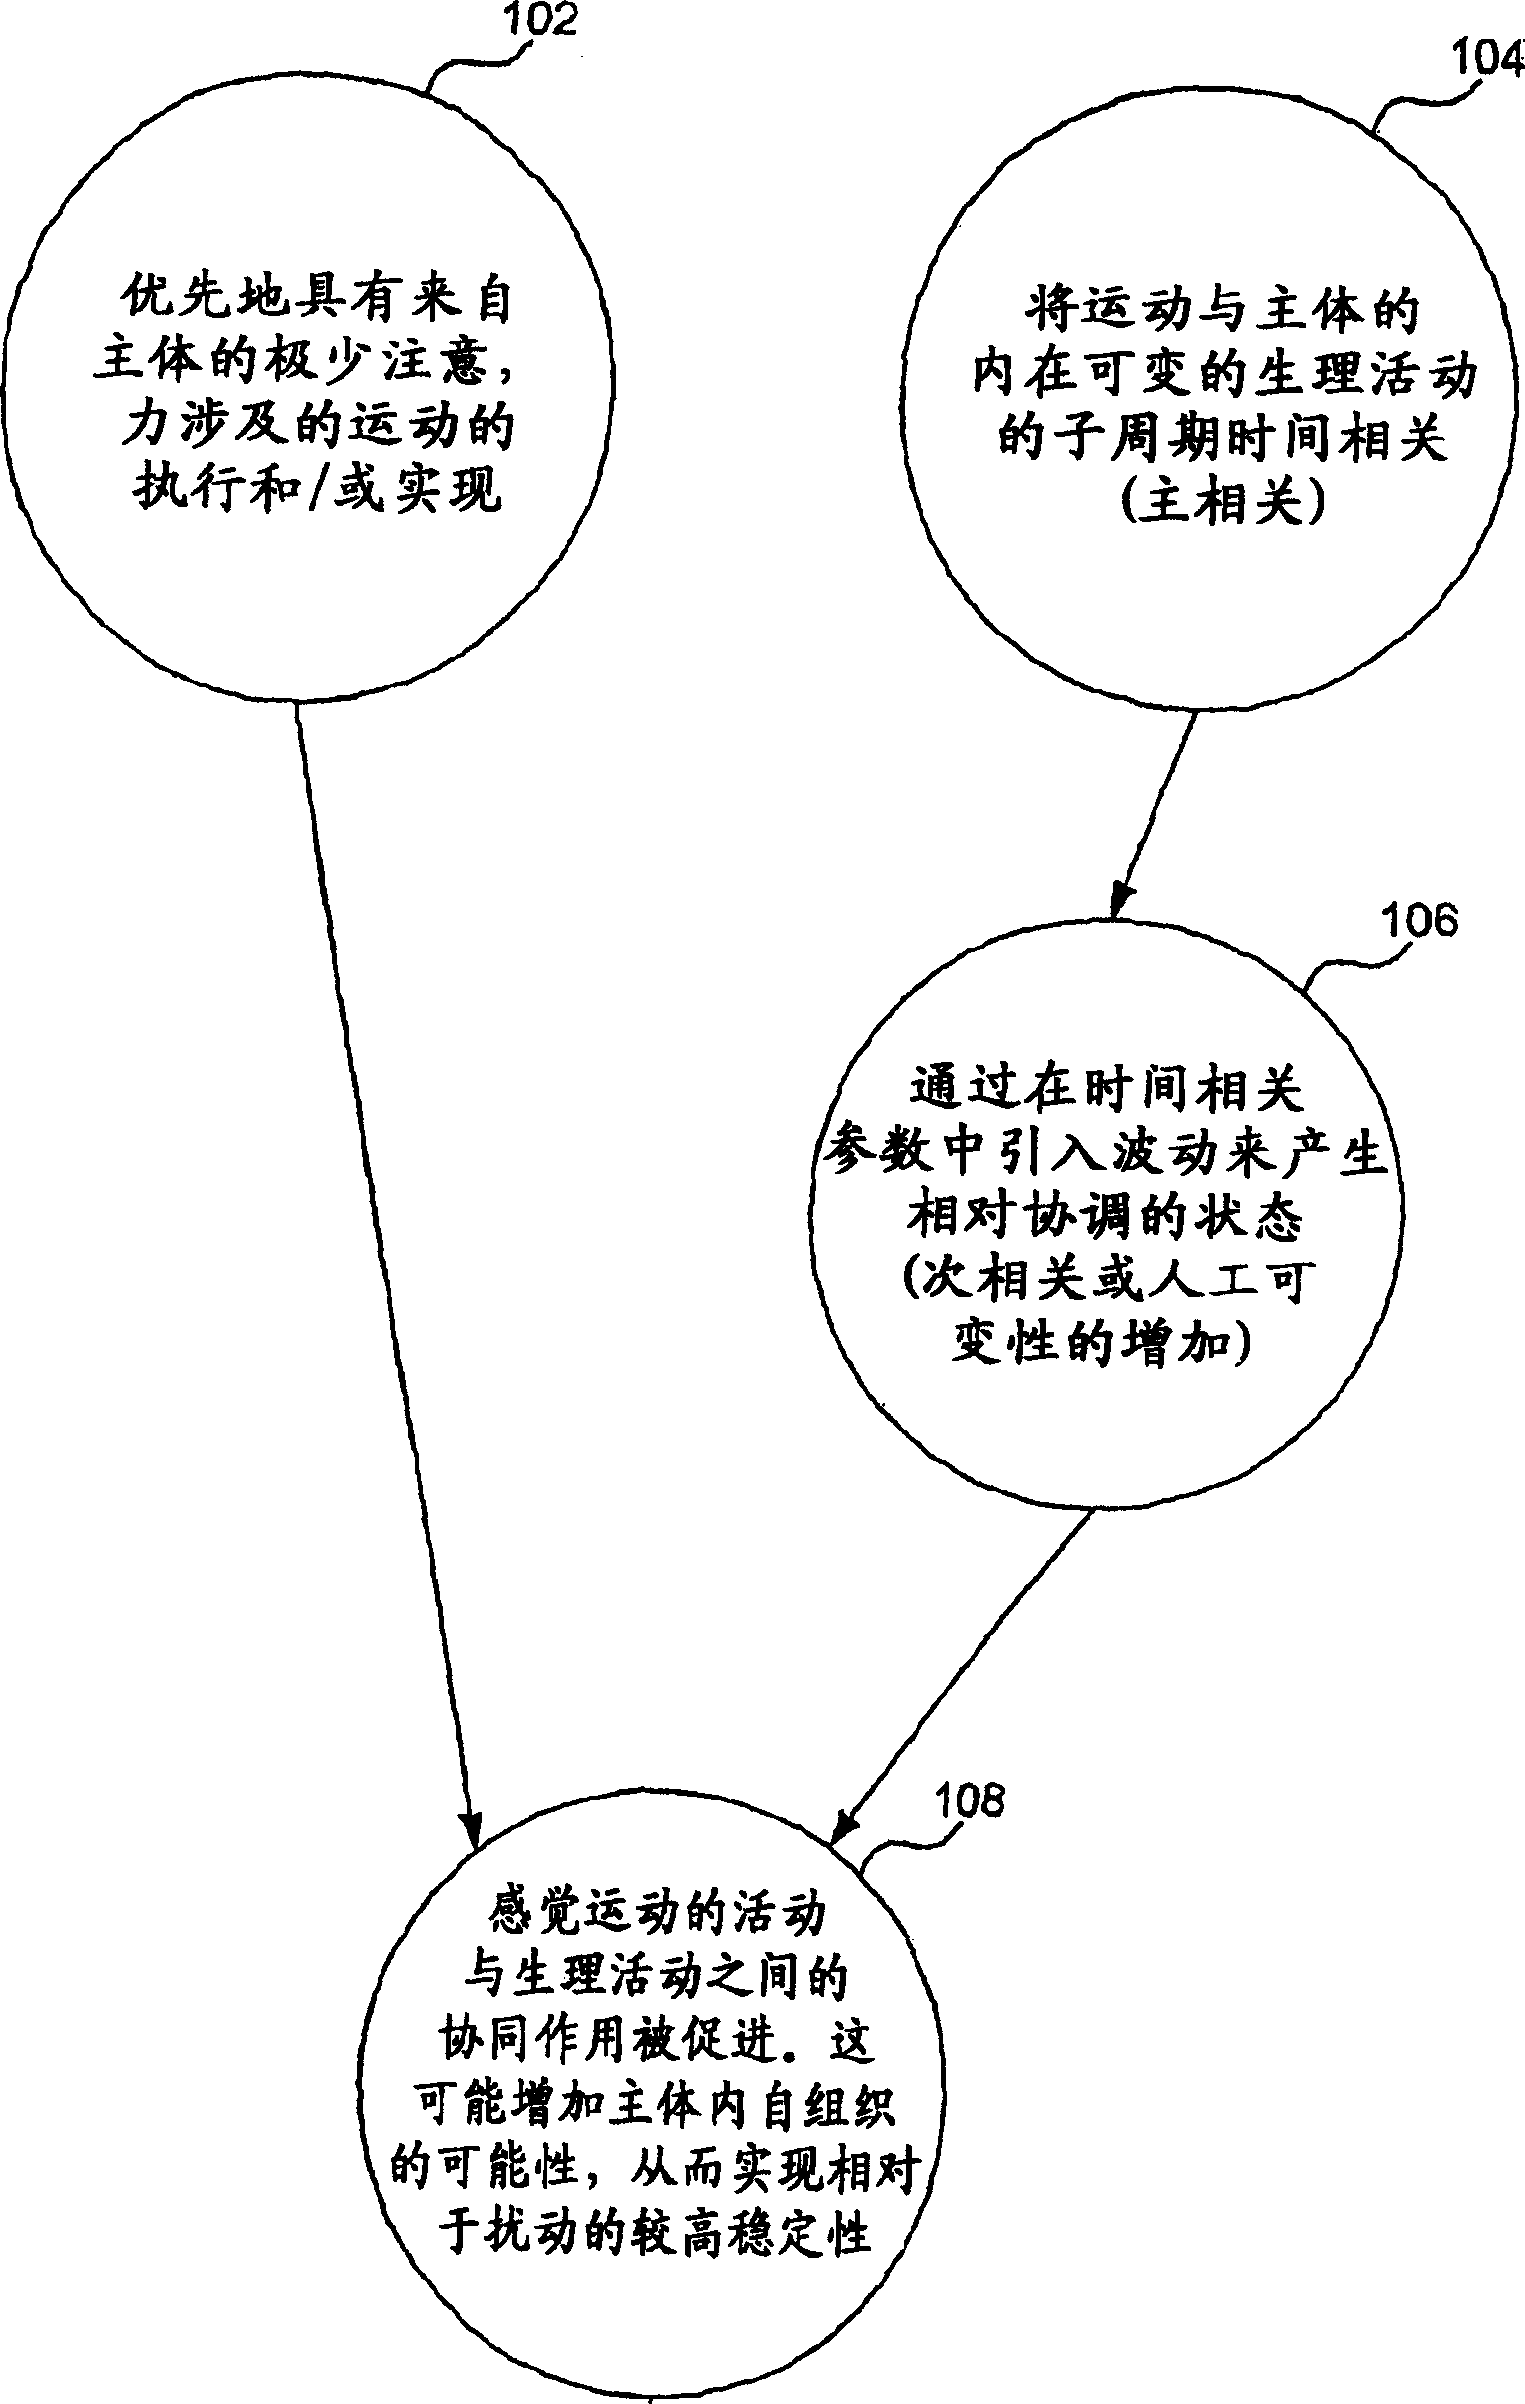 Apparatus, method and computer program product to produce or direct movements in synergic timed correlation with physiological activity